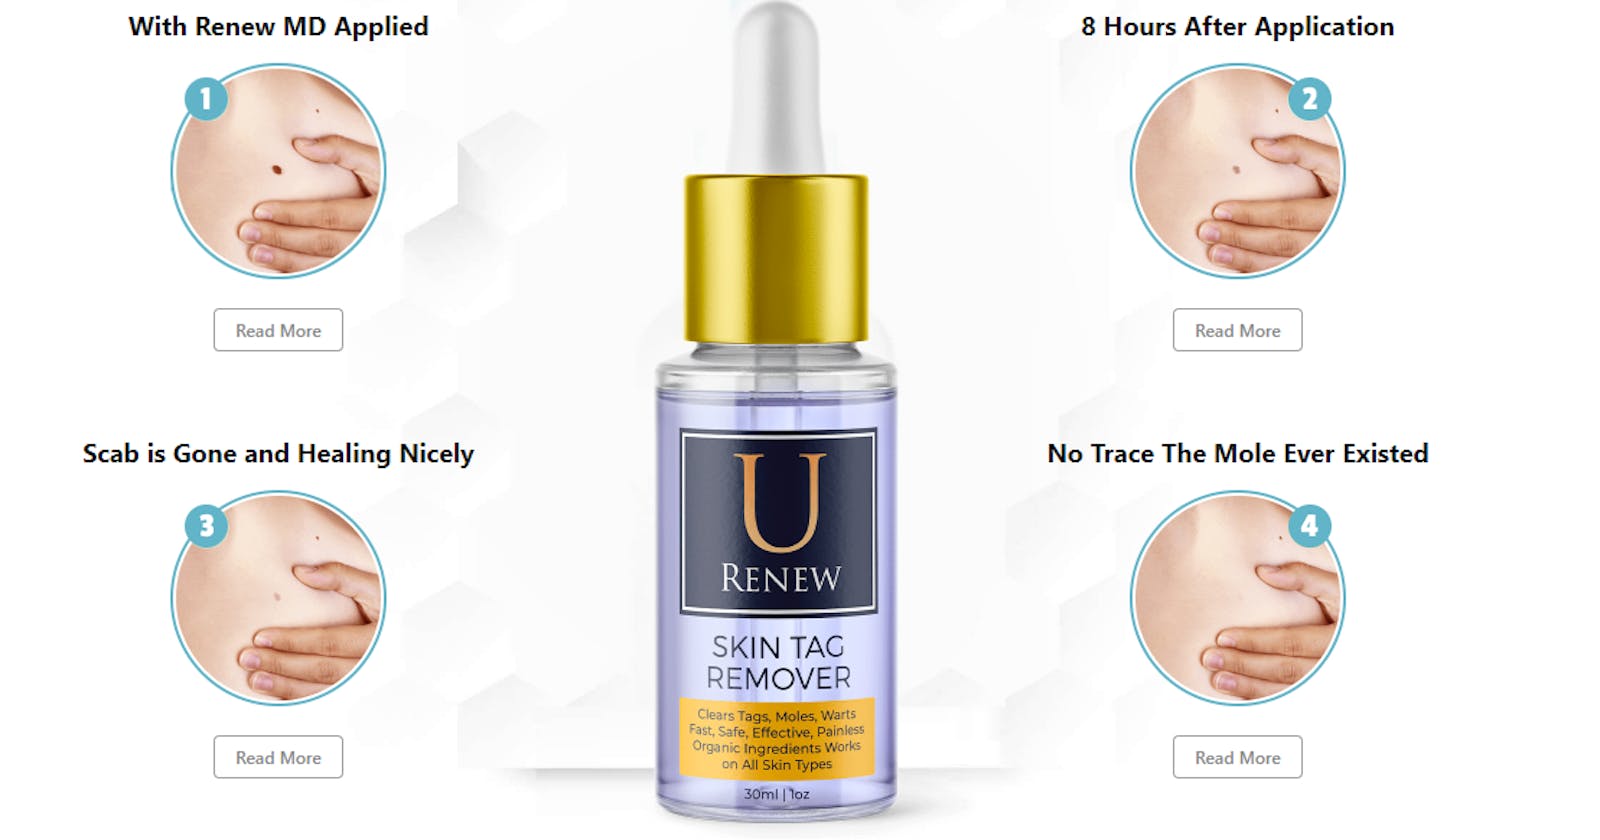 Remove Skin Tags Safely and Easily with U Renew Skin Tag Remover